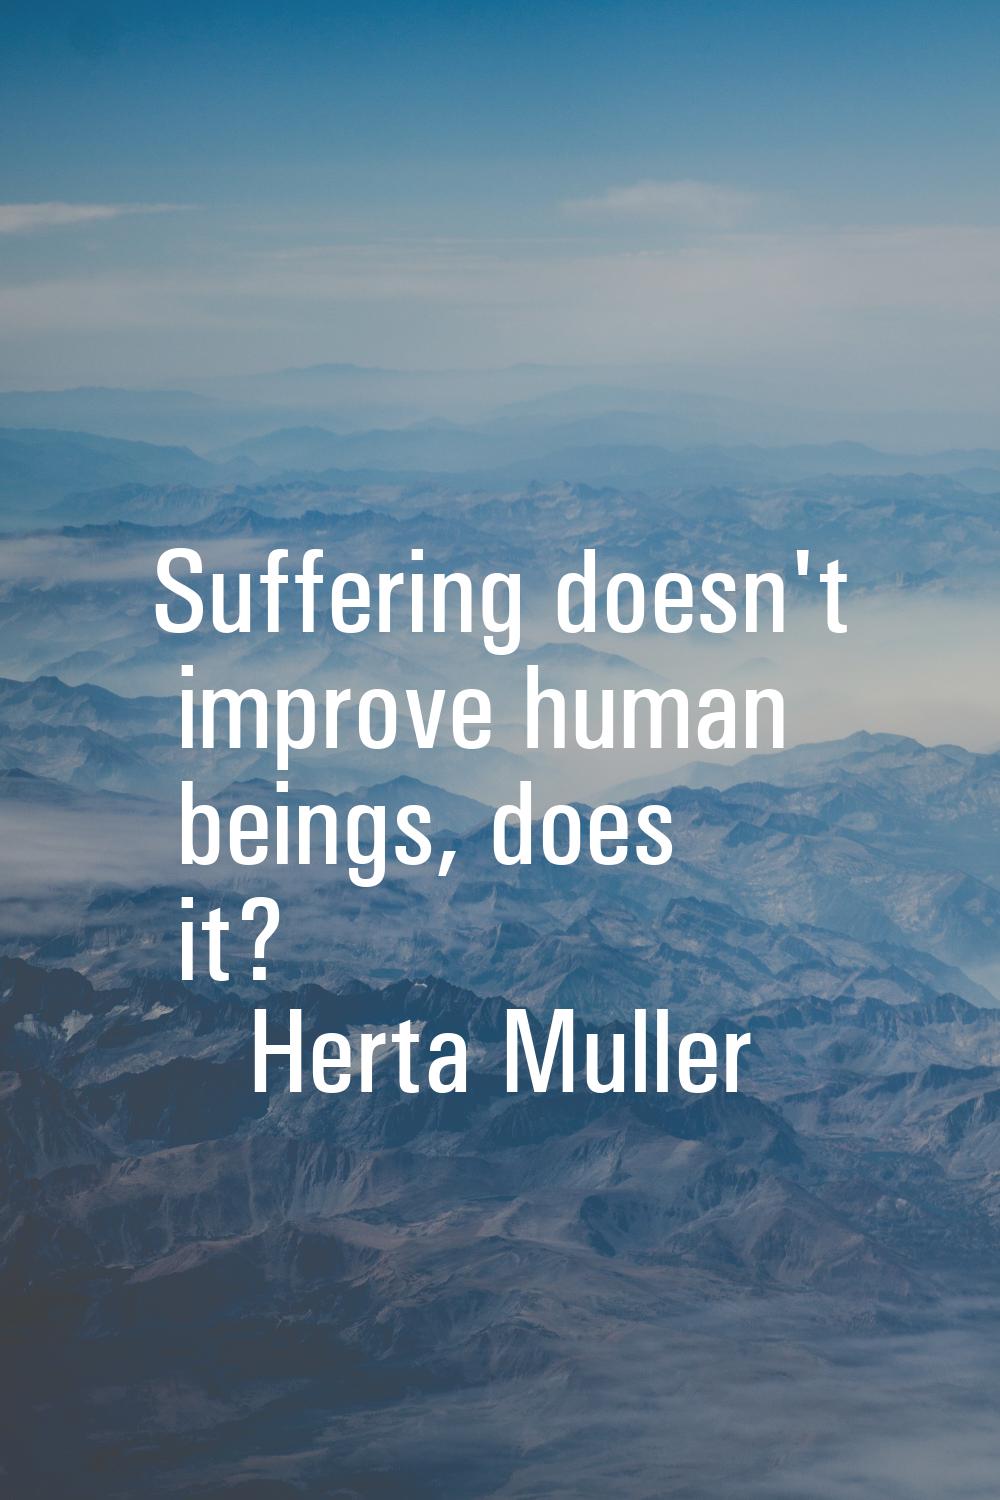 Suffering doesn't improve human beings, does it?